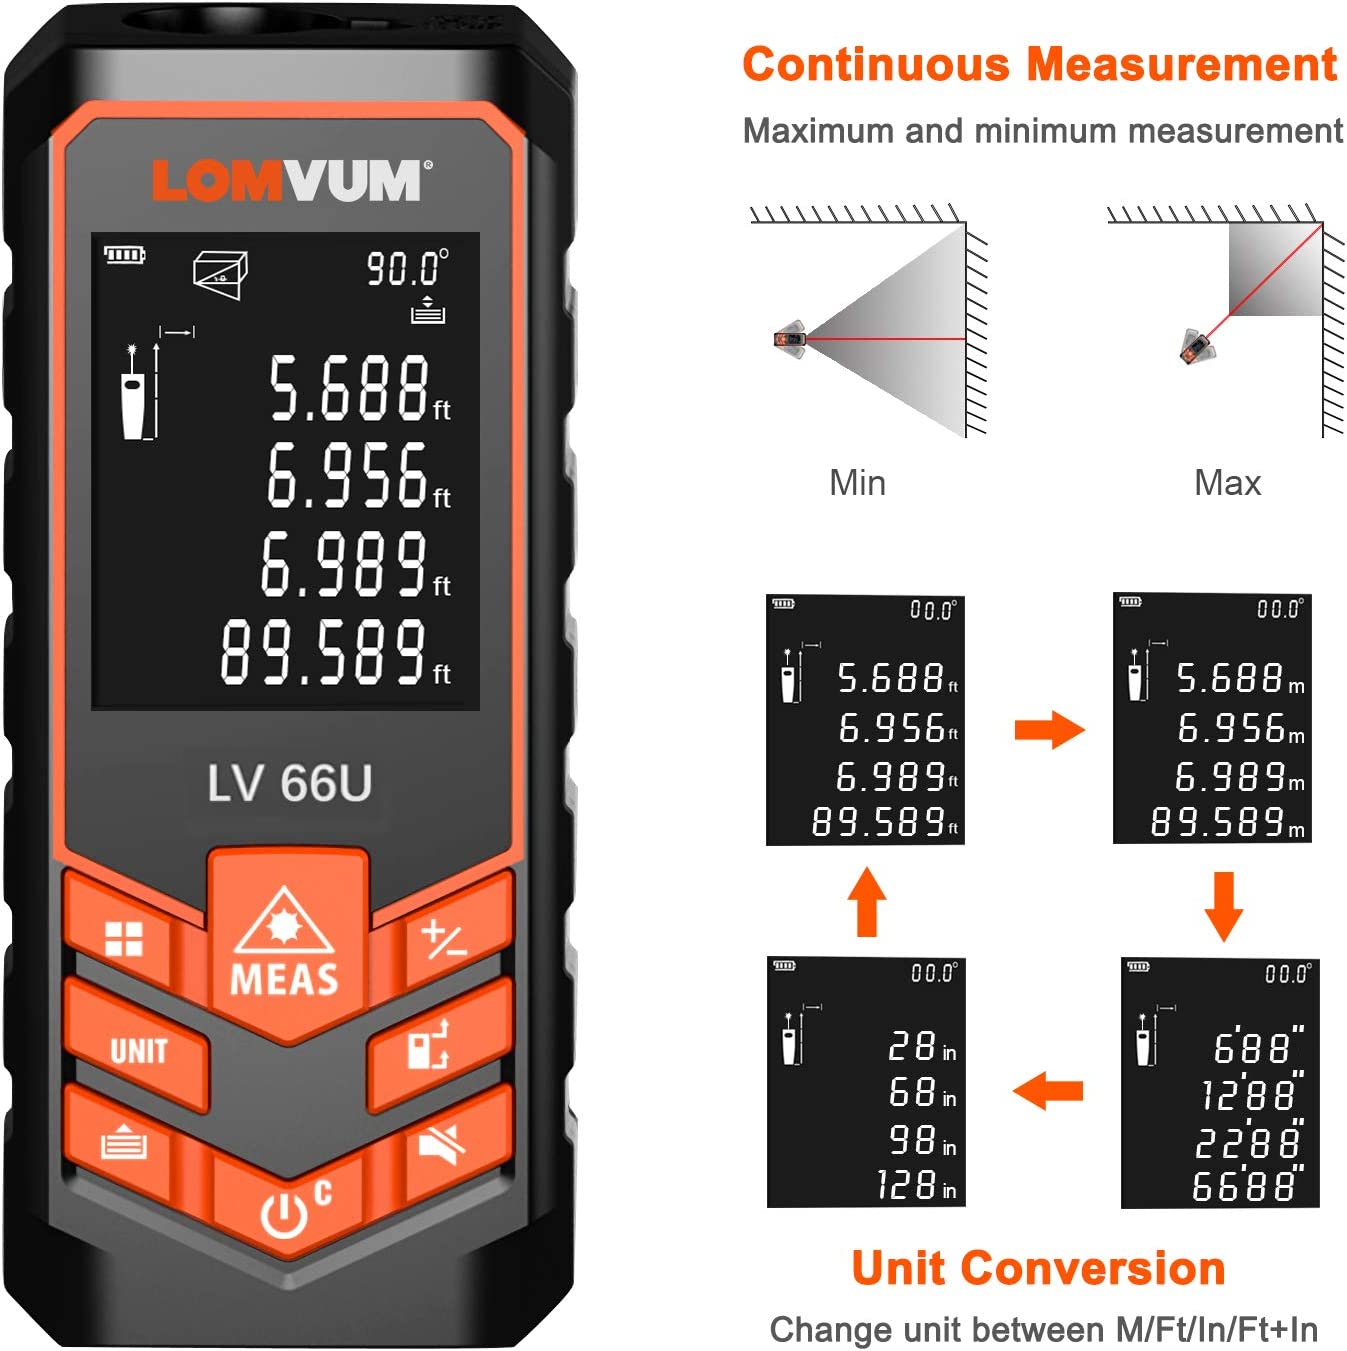 A laser tape measure showing various measurements on the screen which also allows for unit conversion. There is also text which reads 'Continuous Measurement, Maximum and minimum measurement.'